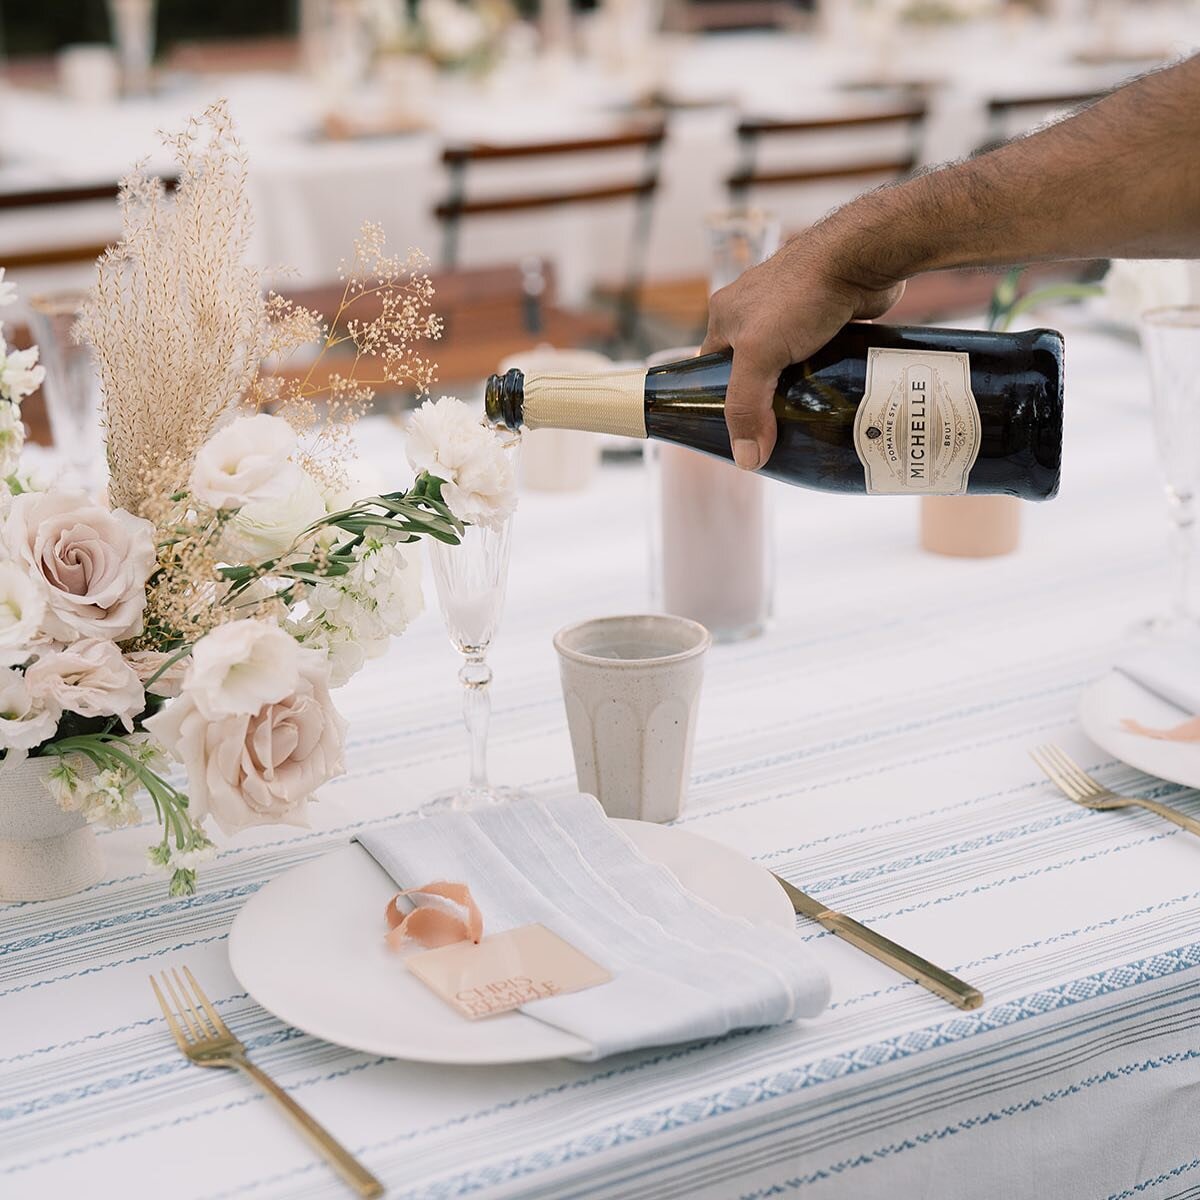 Champagne is always a good idea 🍾 Planning and Design: @fawnevents @fawnevents.erica | Venue: @grandgimeno | Photography: @mallorydawnphoto | Florals: @cultivatedbyfaith | Tabletop: @hostesshaven | Signage: @wildhouseink